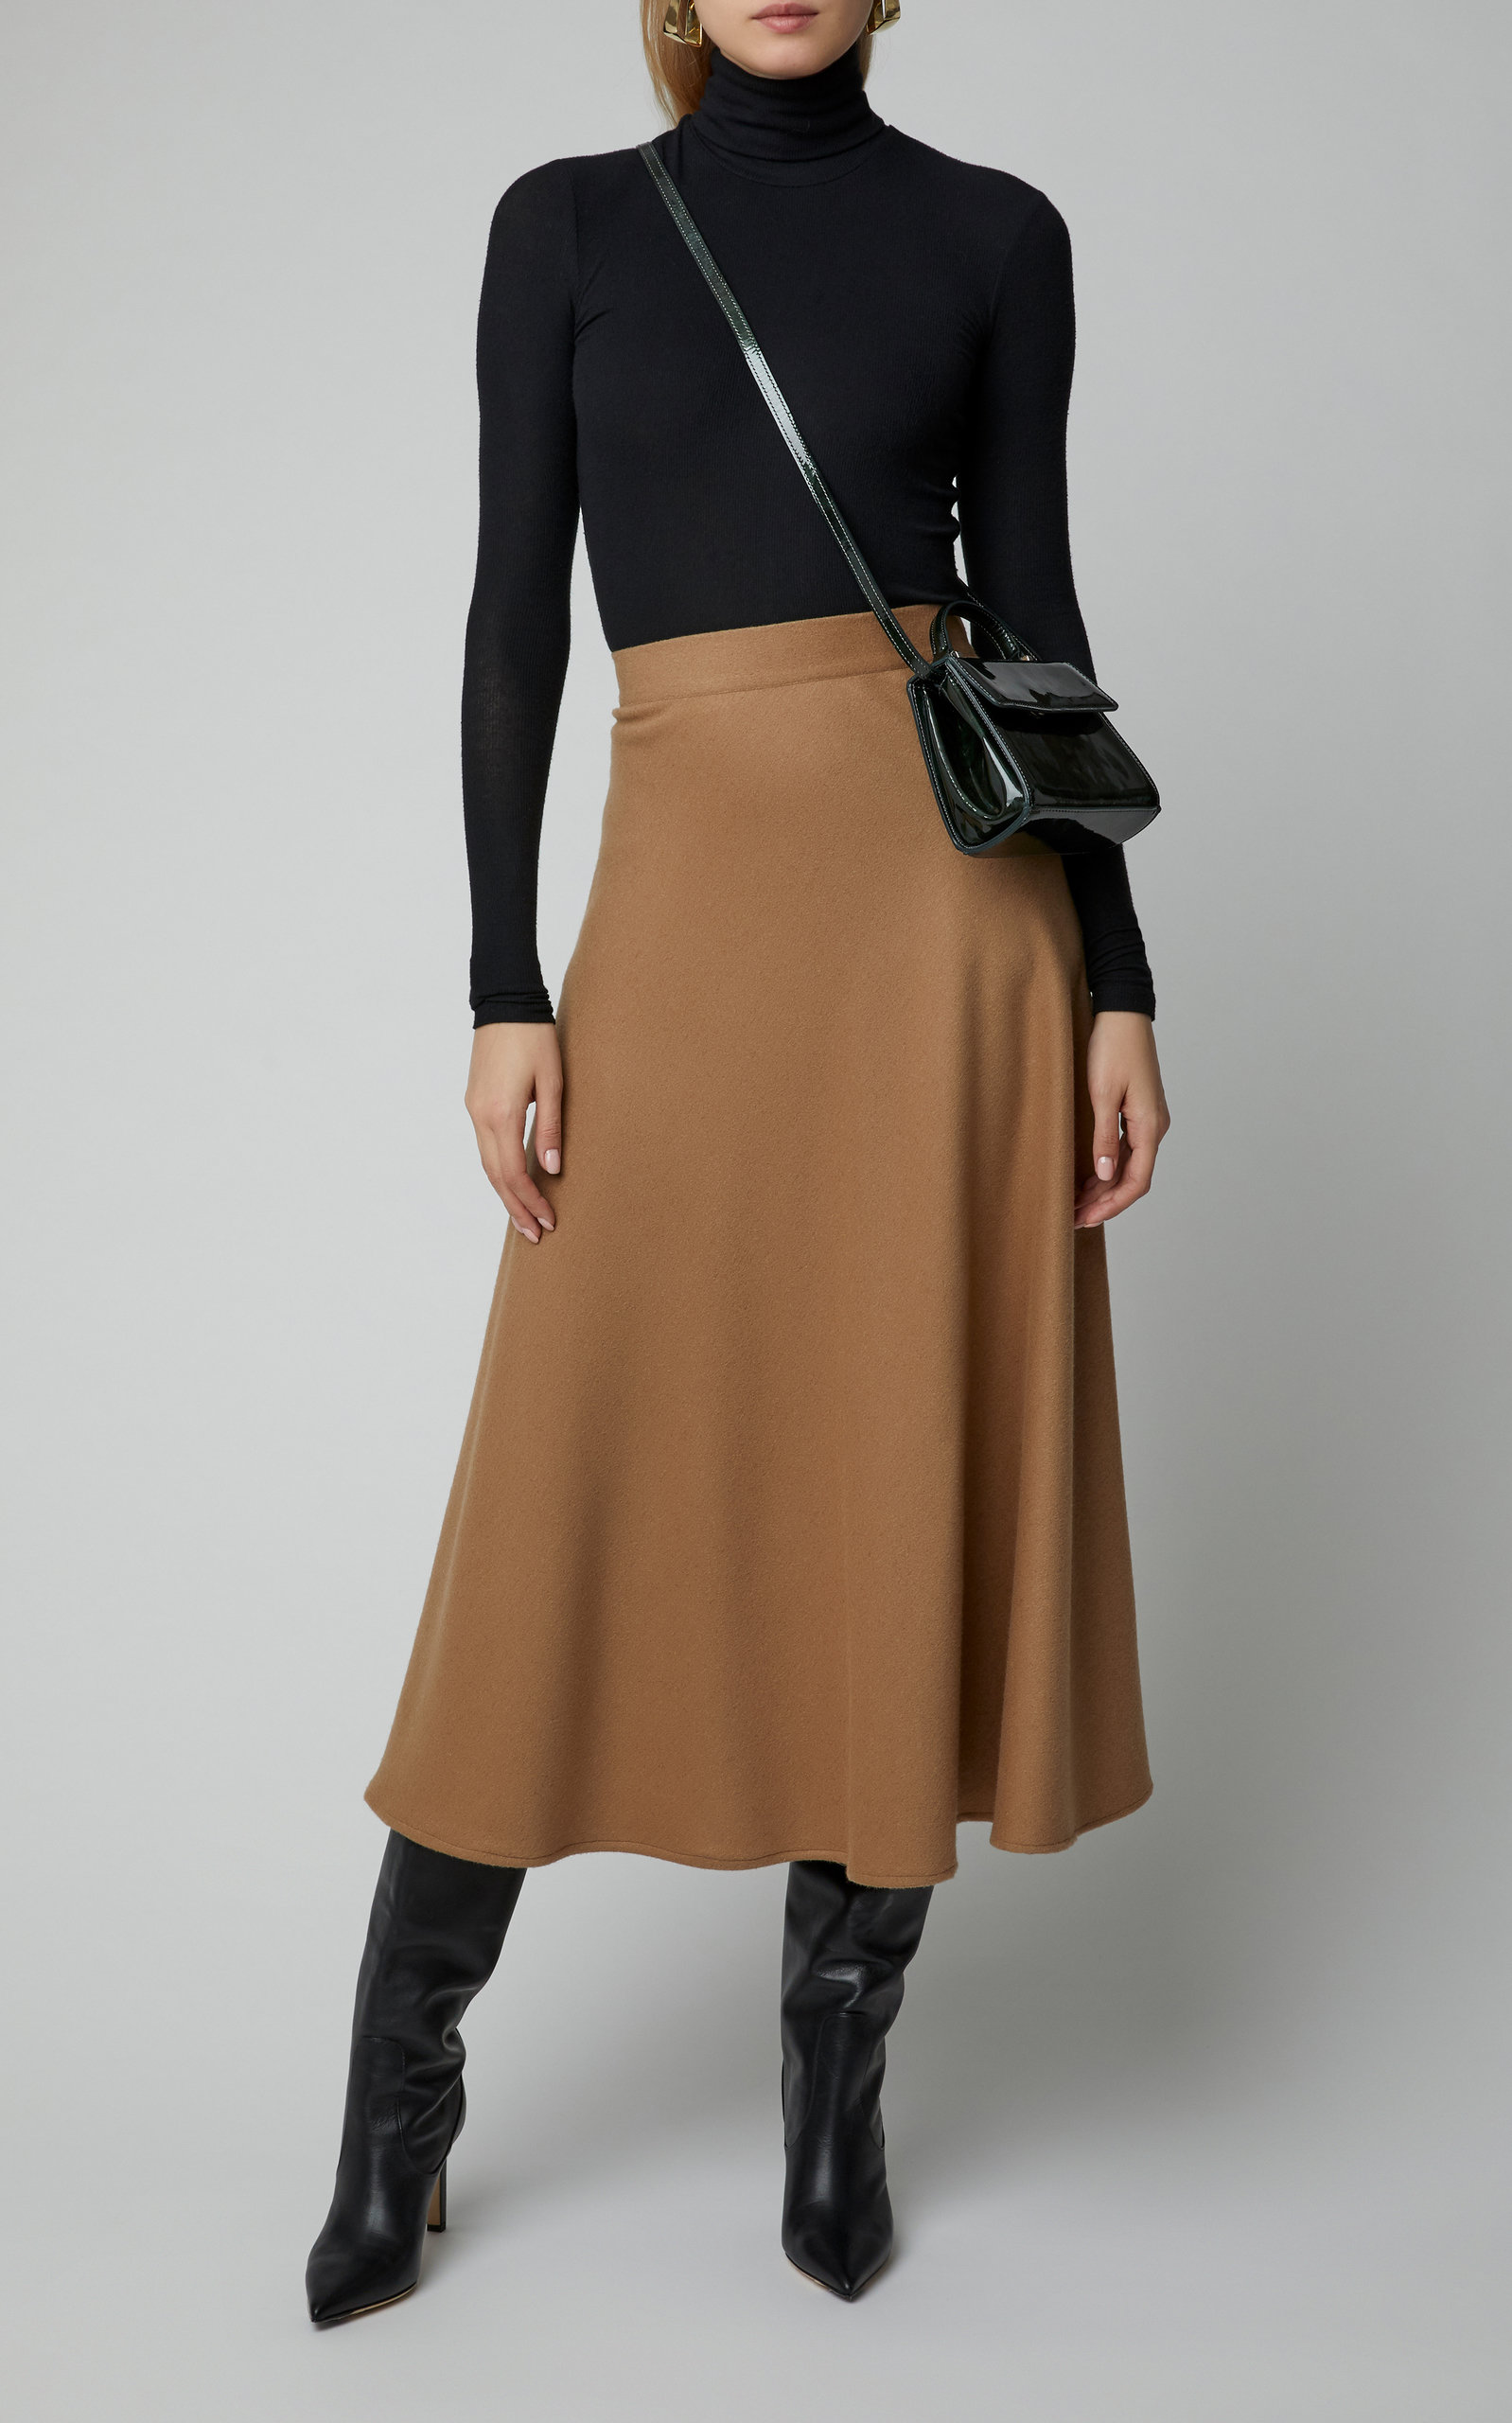 A Line Skirts: Flatter Your Figure with Classic A-Line Skirts